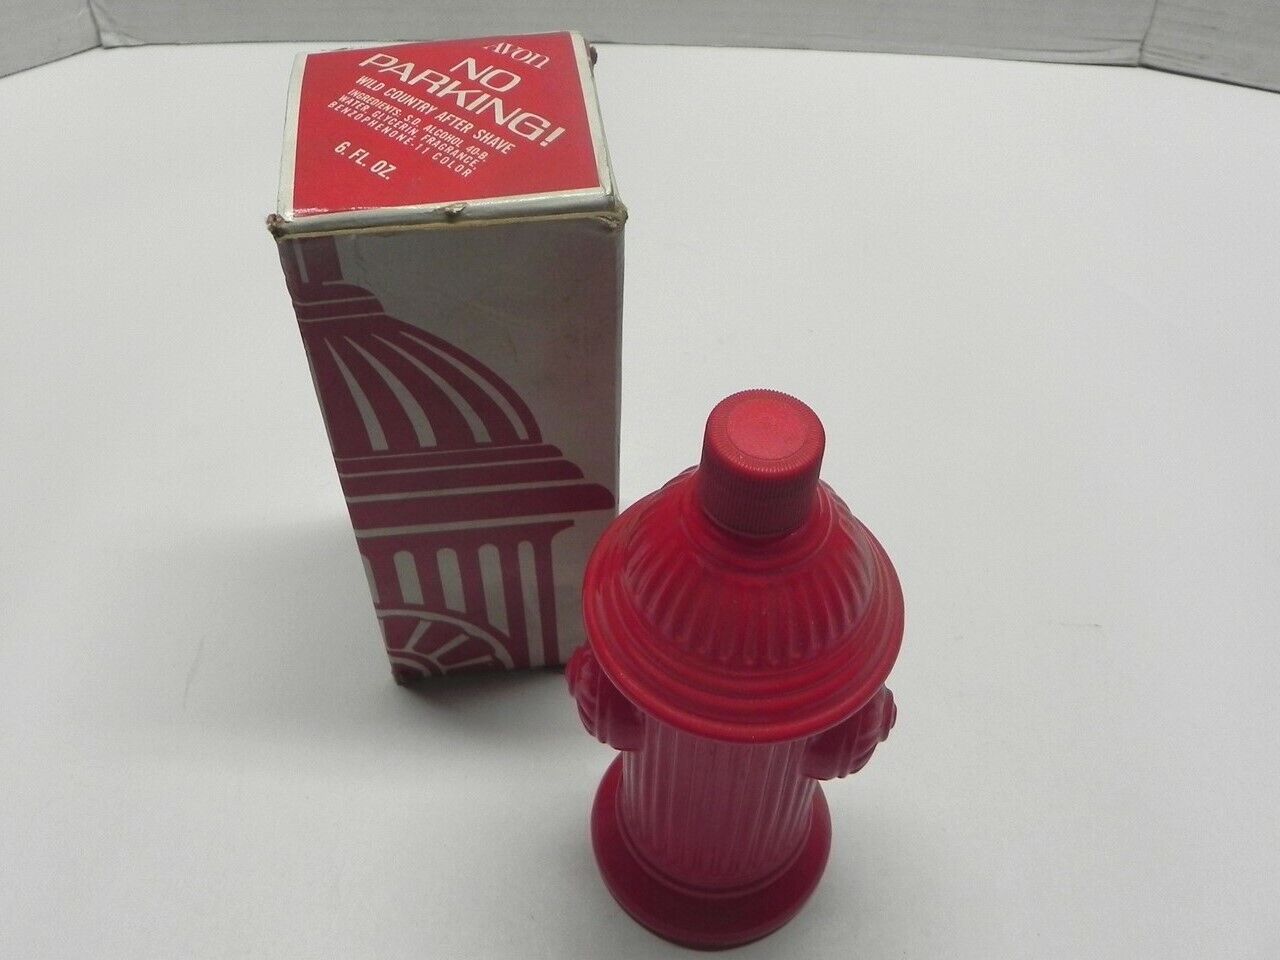 AVON NO PARKING FIRE HYDRANT 6 FL OZ AFTER SHAVE (EMPTY)